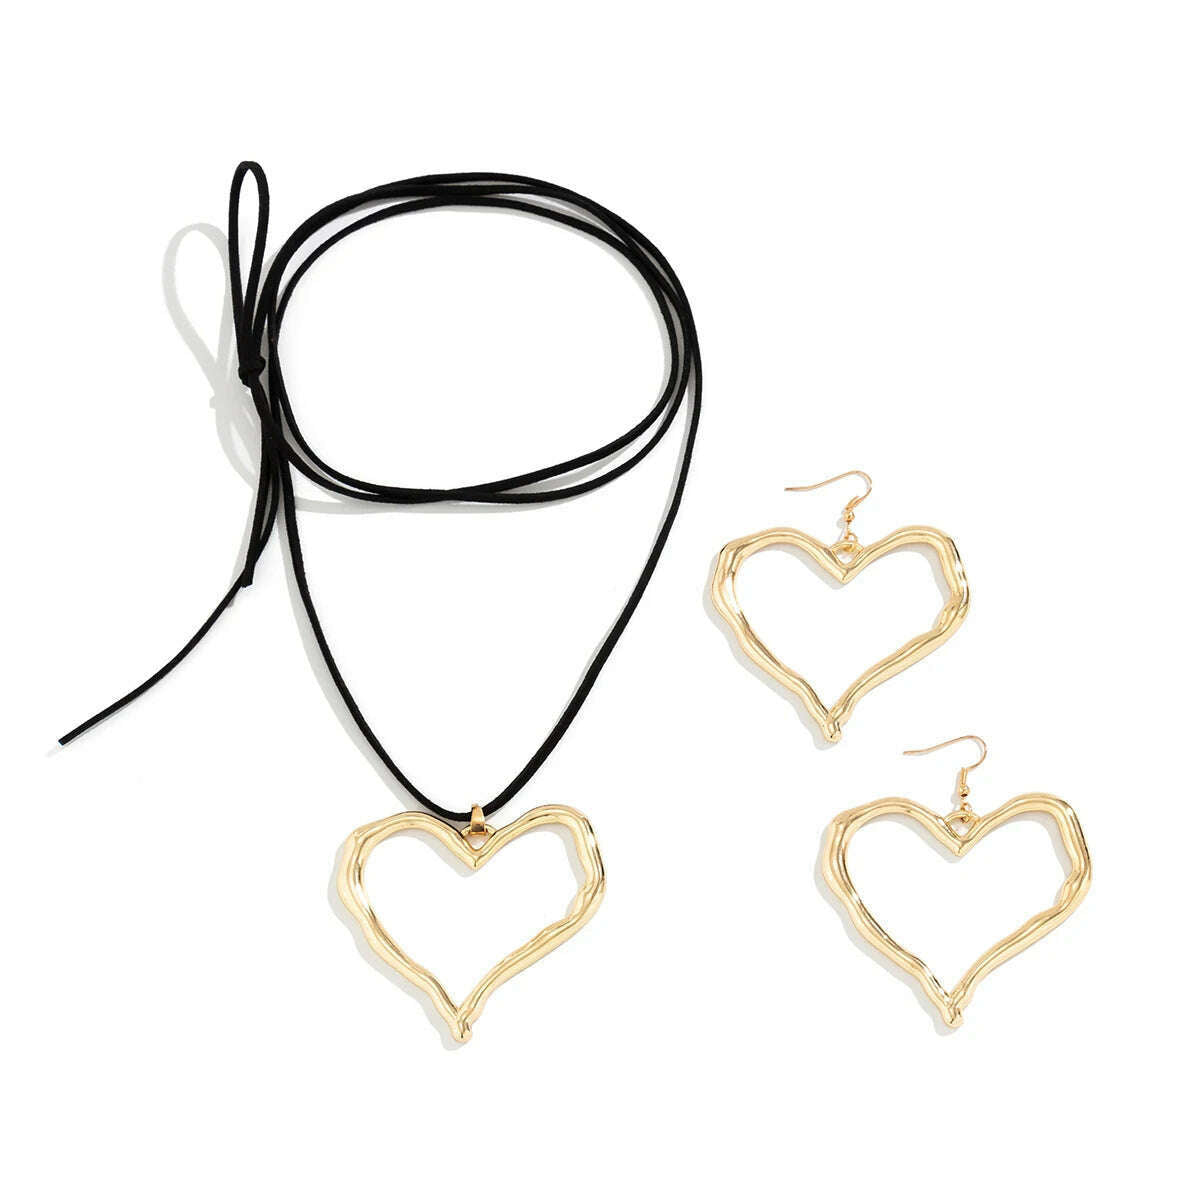 KIMLUD, 2Pcs/Set Exaggerated Big Hollow Love Heart Pendant Choker Necklace Bracelet for Women Adjustable Rope Chain Y2K Jewelry Set Gift, KIMLUD Womens Clothes